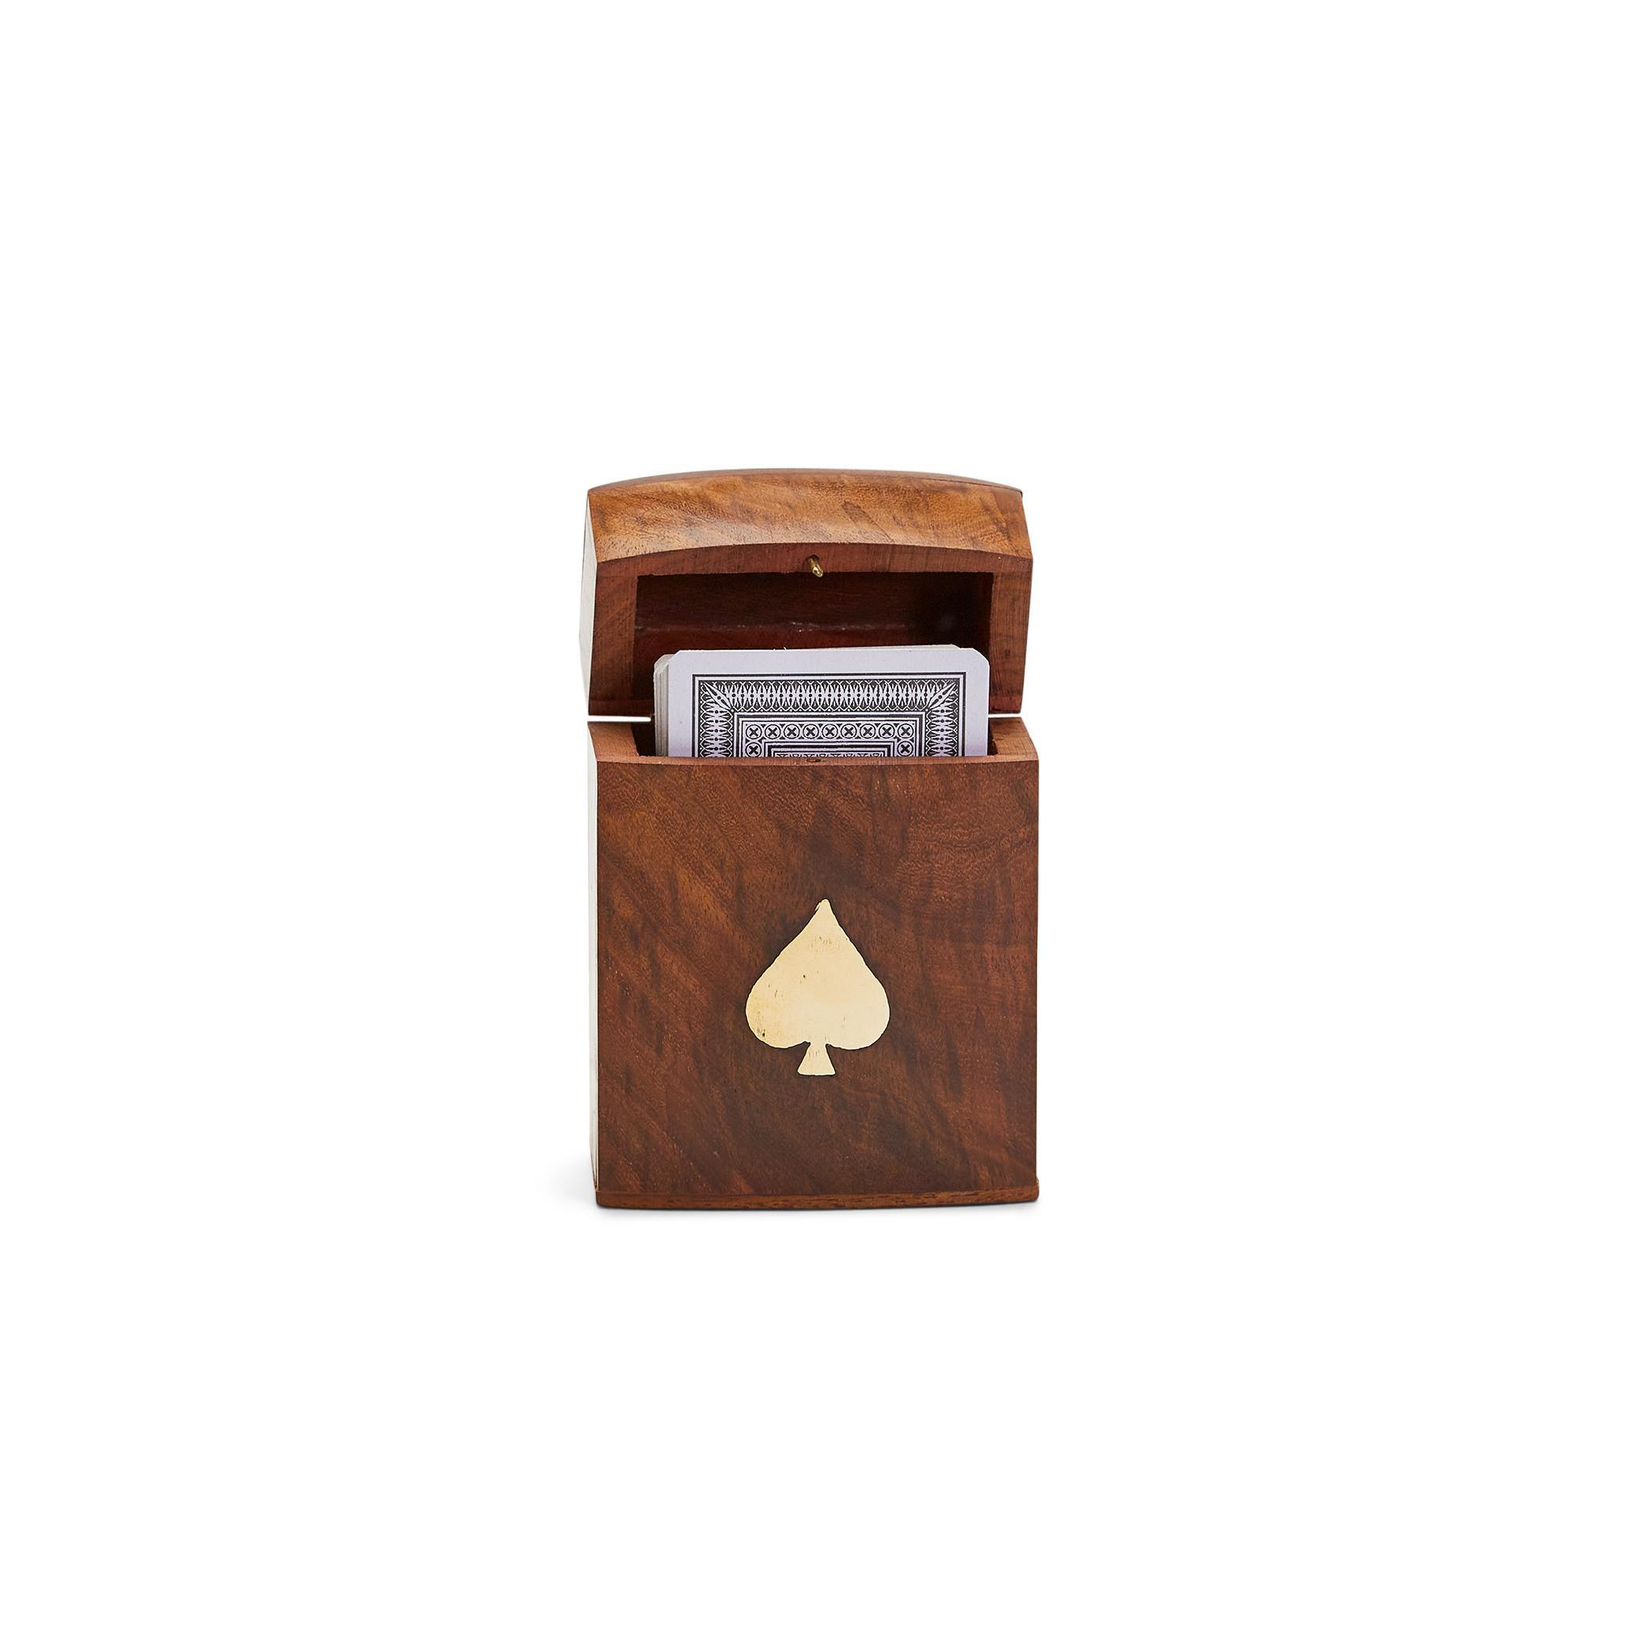 Two's Company, Inc. Wood Crafted Playing Card Set in Wooden Box